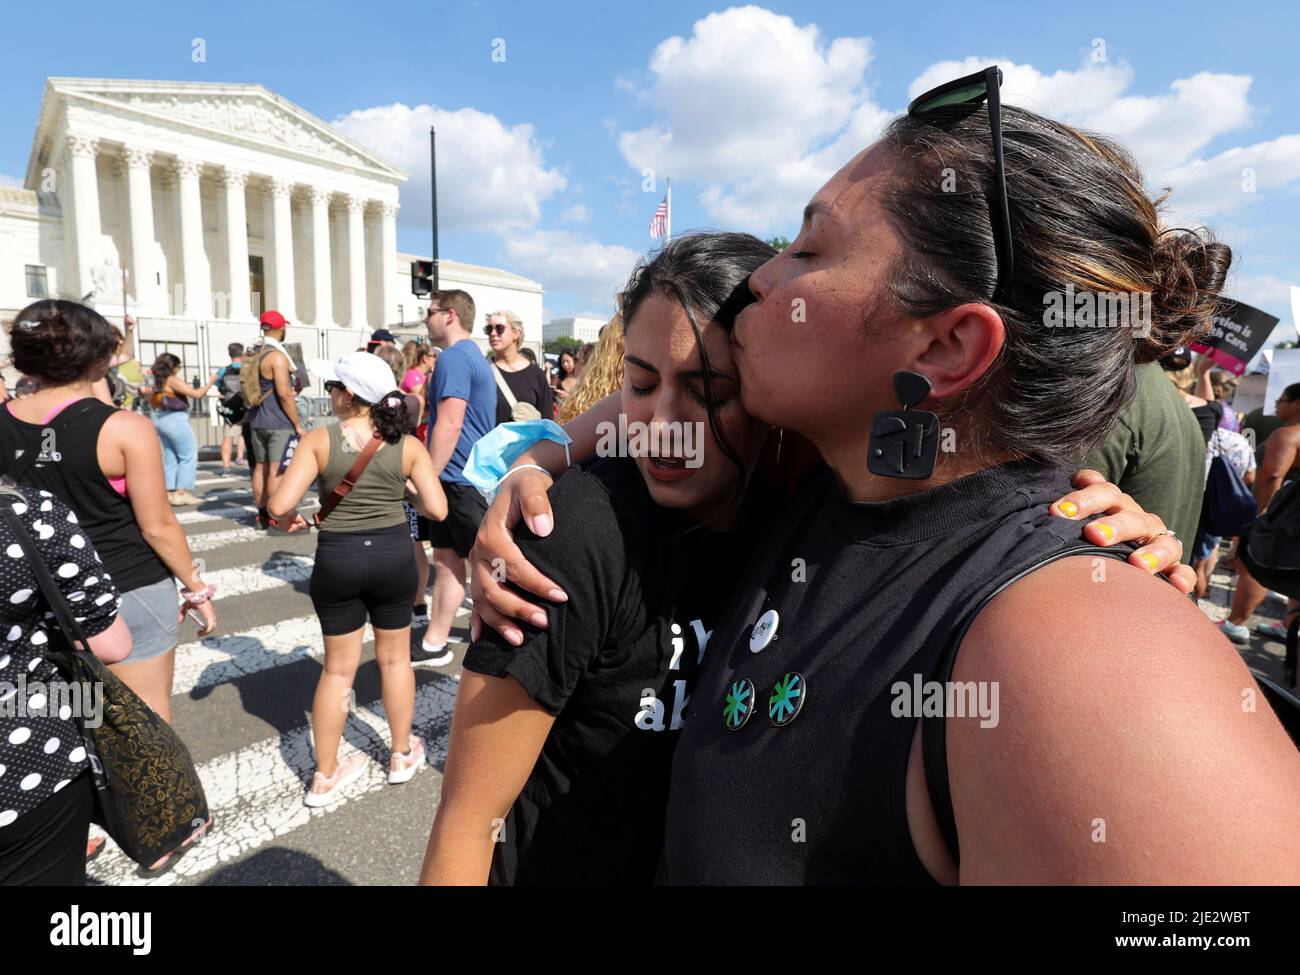 MJ Flores (L), a San Antonio Texas woman who had an abortion in Texas, cries while hugging Daniela Diaz (R), a friend from Venezuela who had an abortion in Washington, DC, during a protest outside the United States Supreme Court as the court rules in the Dobbs v Women's Health Organization abortion case, overturning the landmark Roe v Wade abortion decision, in Washington, DC, U.S., June 24, 2022. REUTERS/Jim Bourg Stock Photo